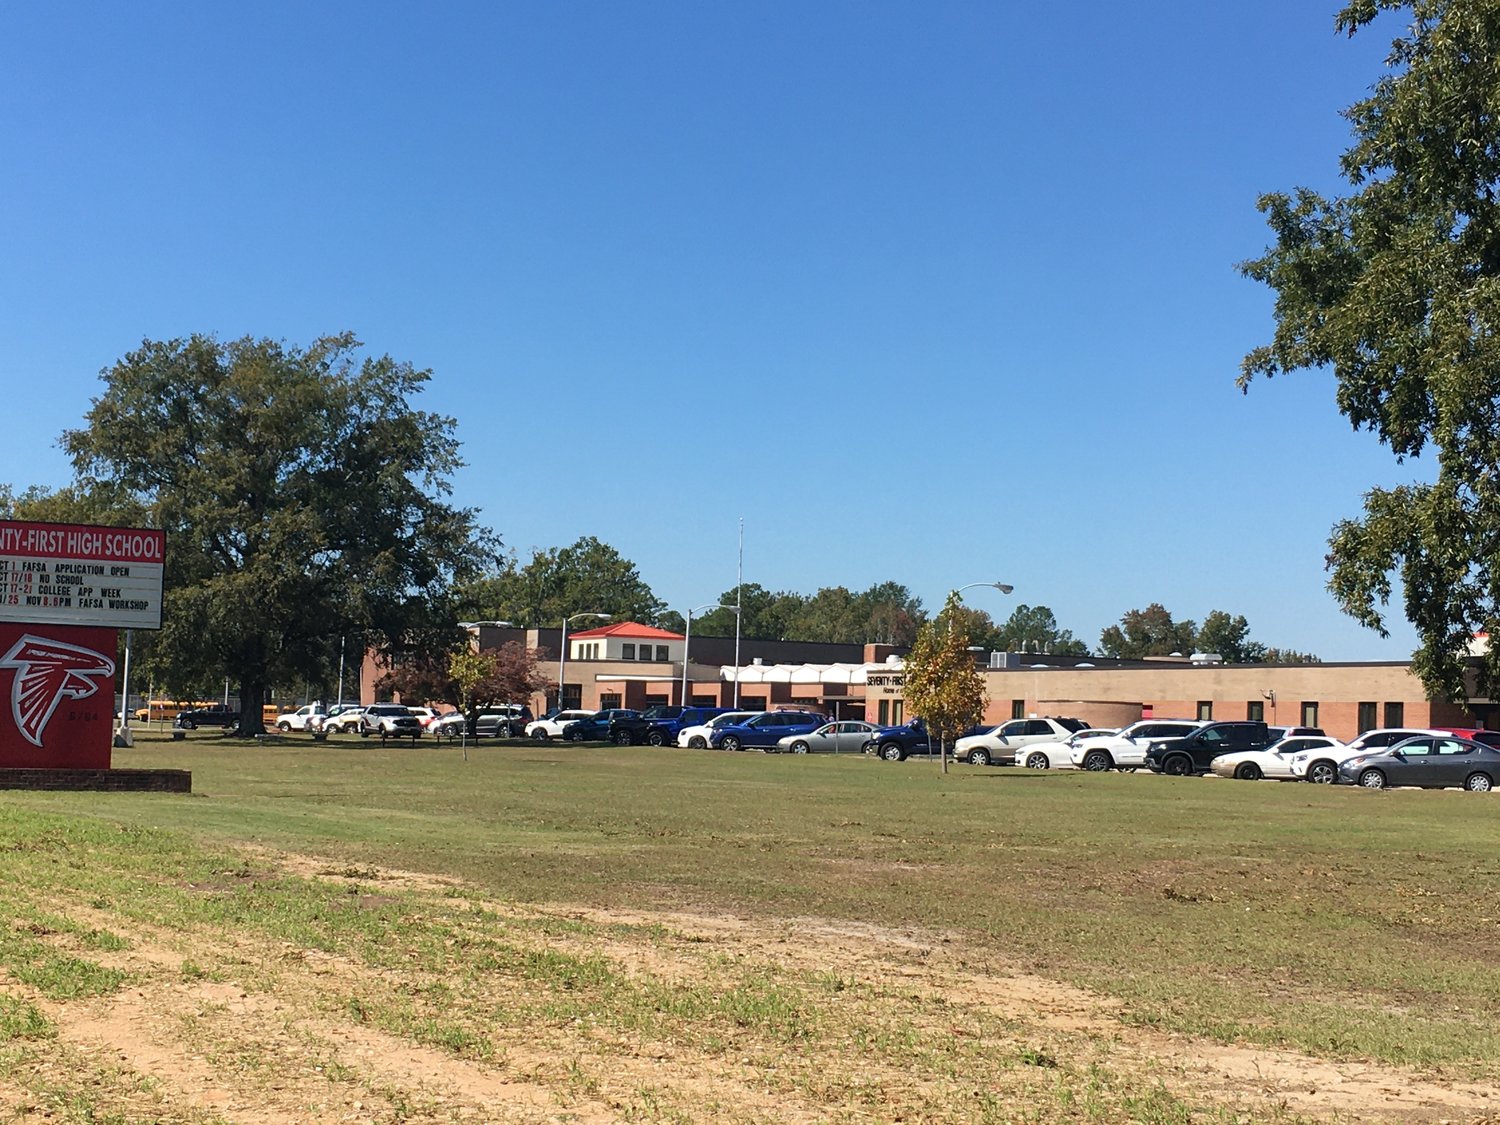 Two Fayetteville schools were briefly placed on lockdown Friday morning after a suspicious person was seen on one of the campuses. There was 'no active threat,' Fayetteville Police said.